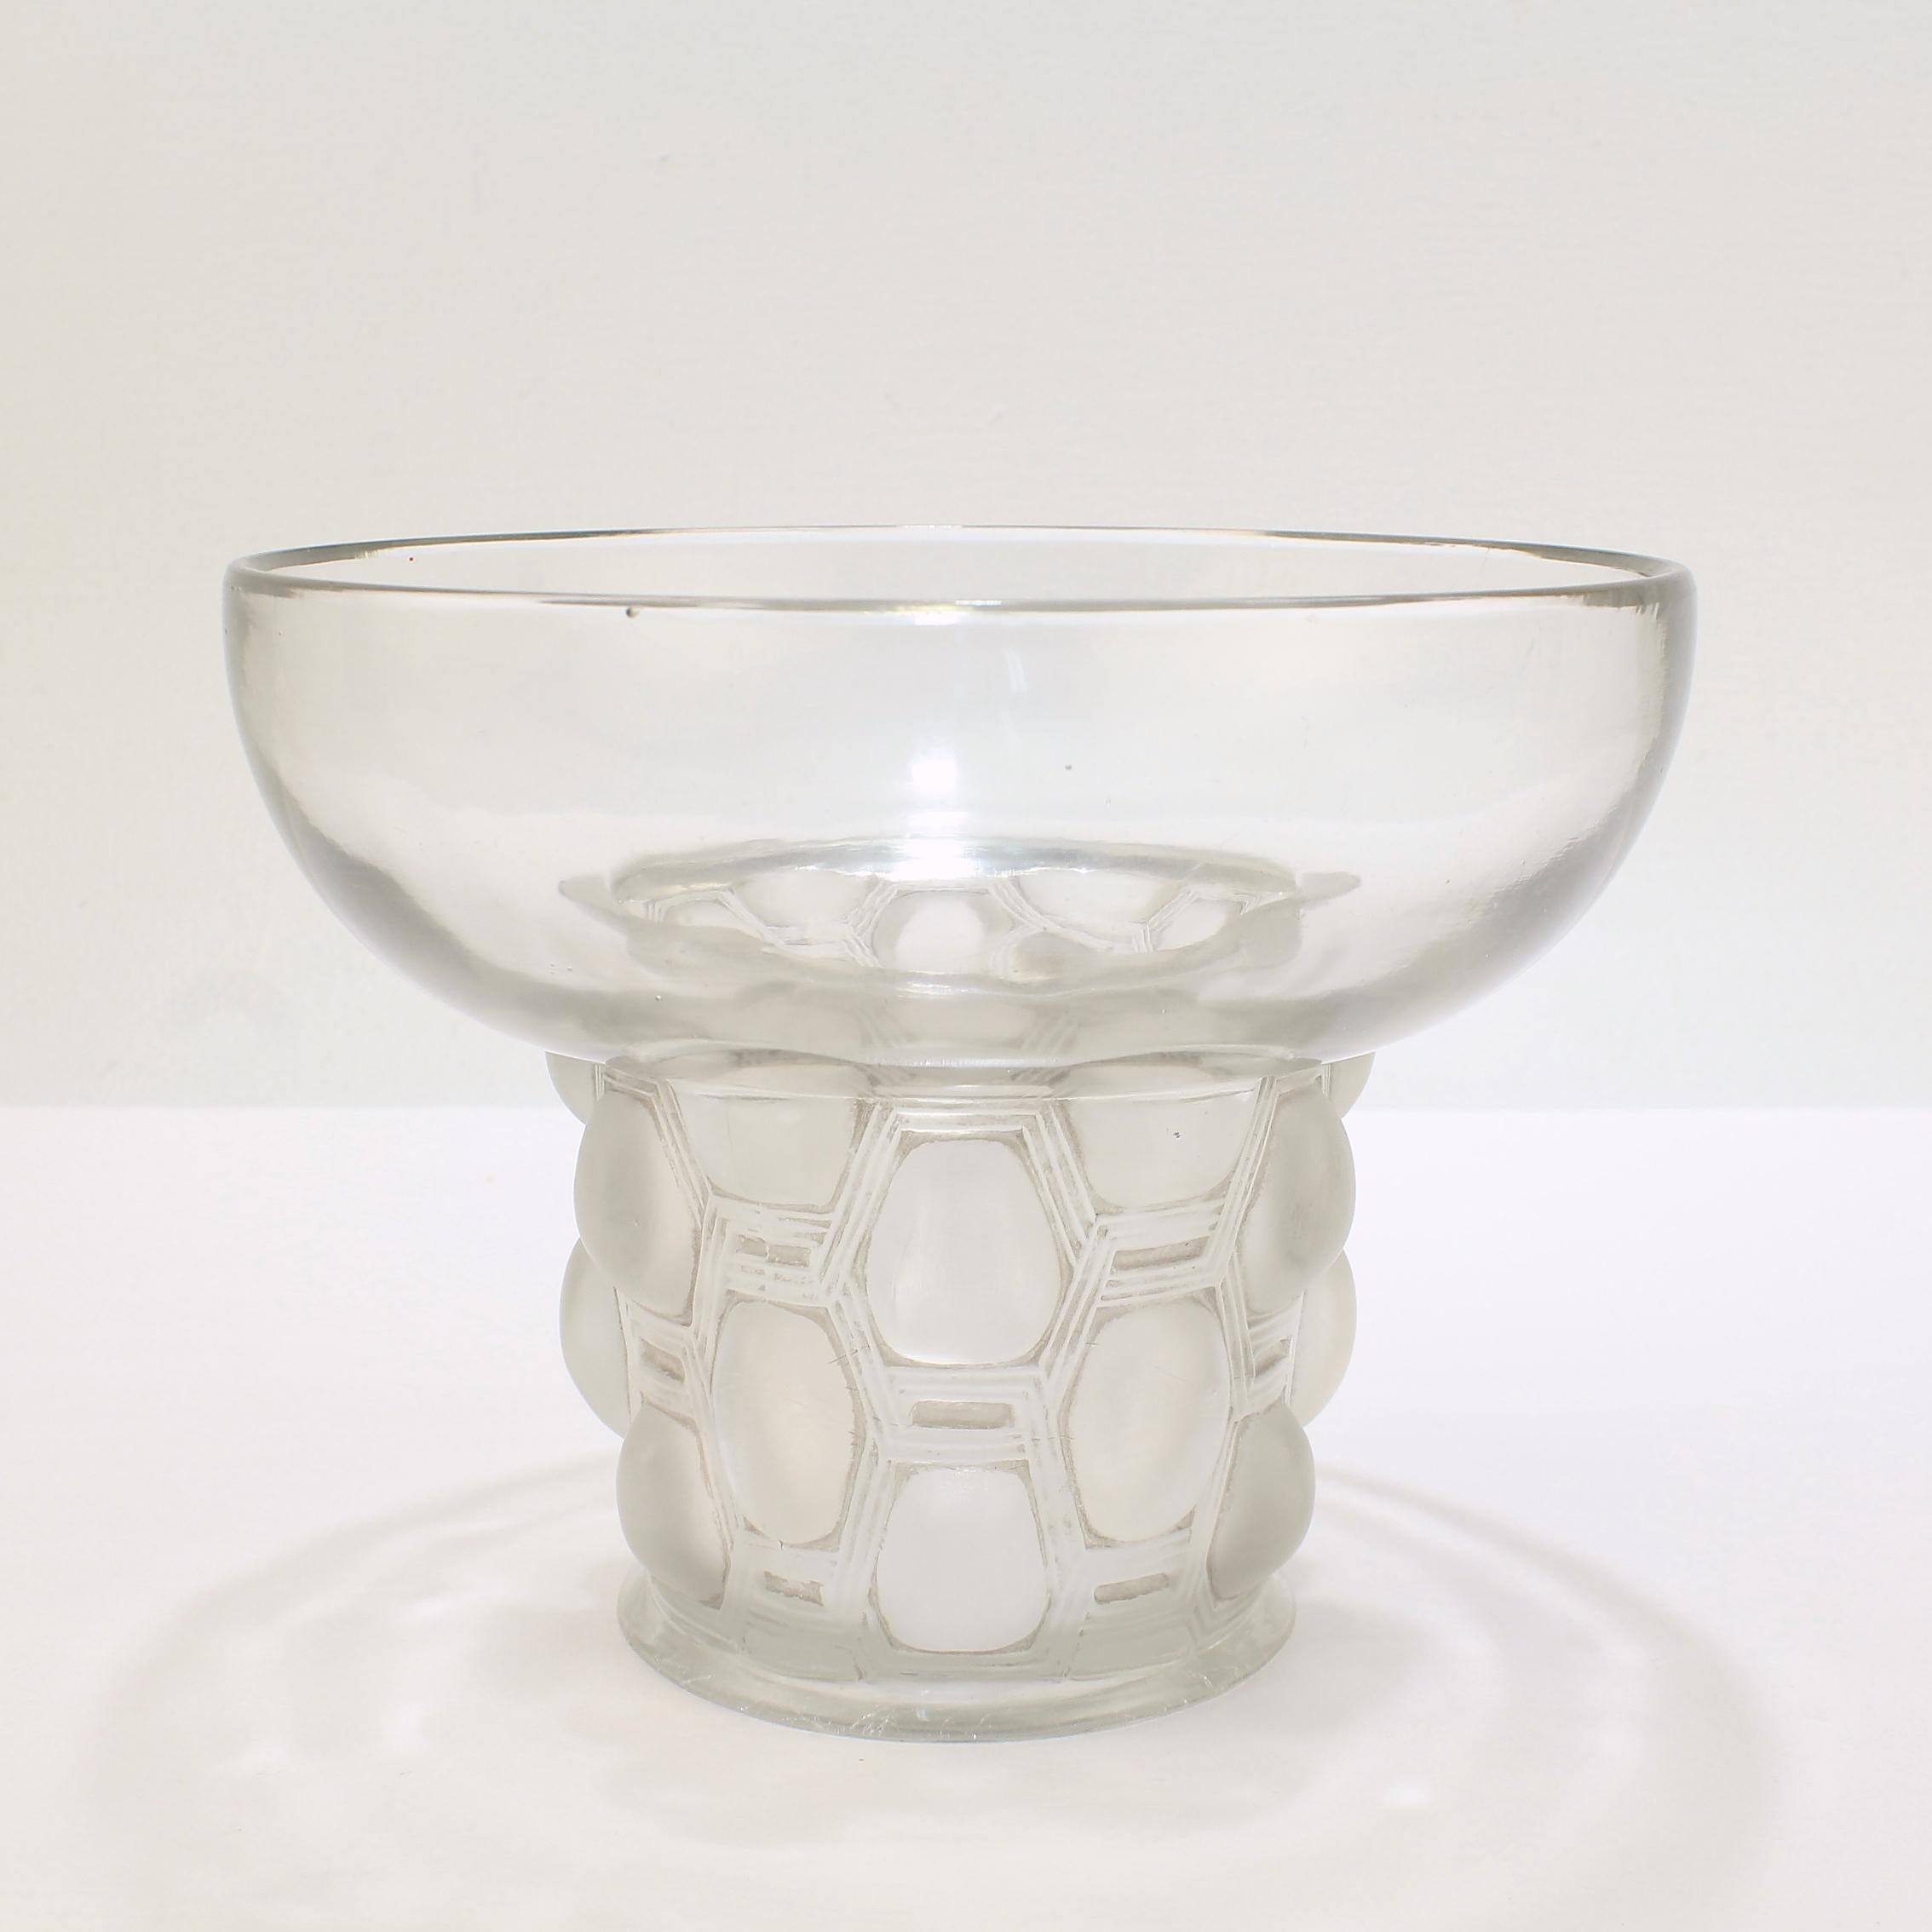 A fine, period Art Deco art glass vase by Lalique. 

In the Beautreillis pattern.

With the traces of a gray patina on slightly gray-toned glass.

A wonderful period vase by Rene Lalique! 

Date:
Early 20th century

Overall condition:
It